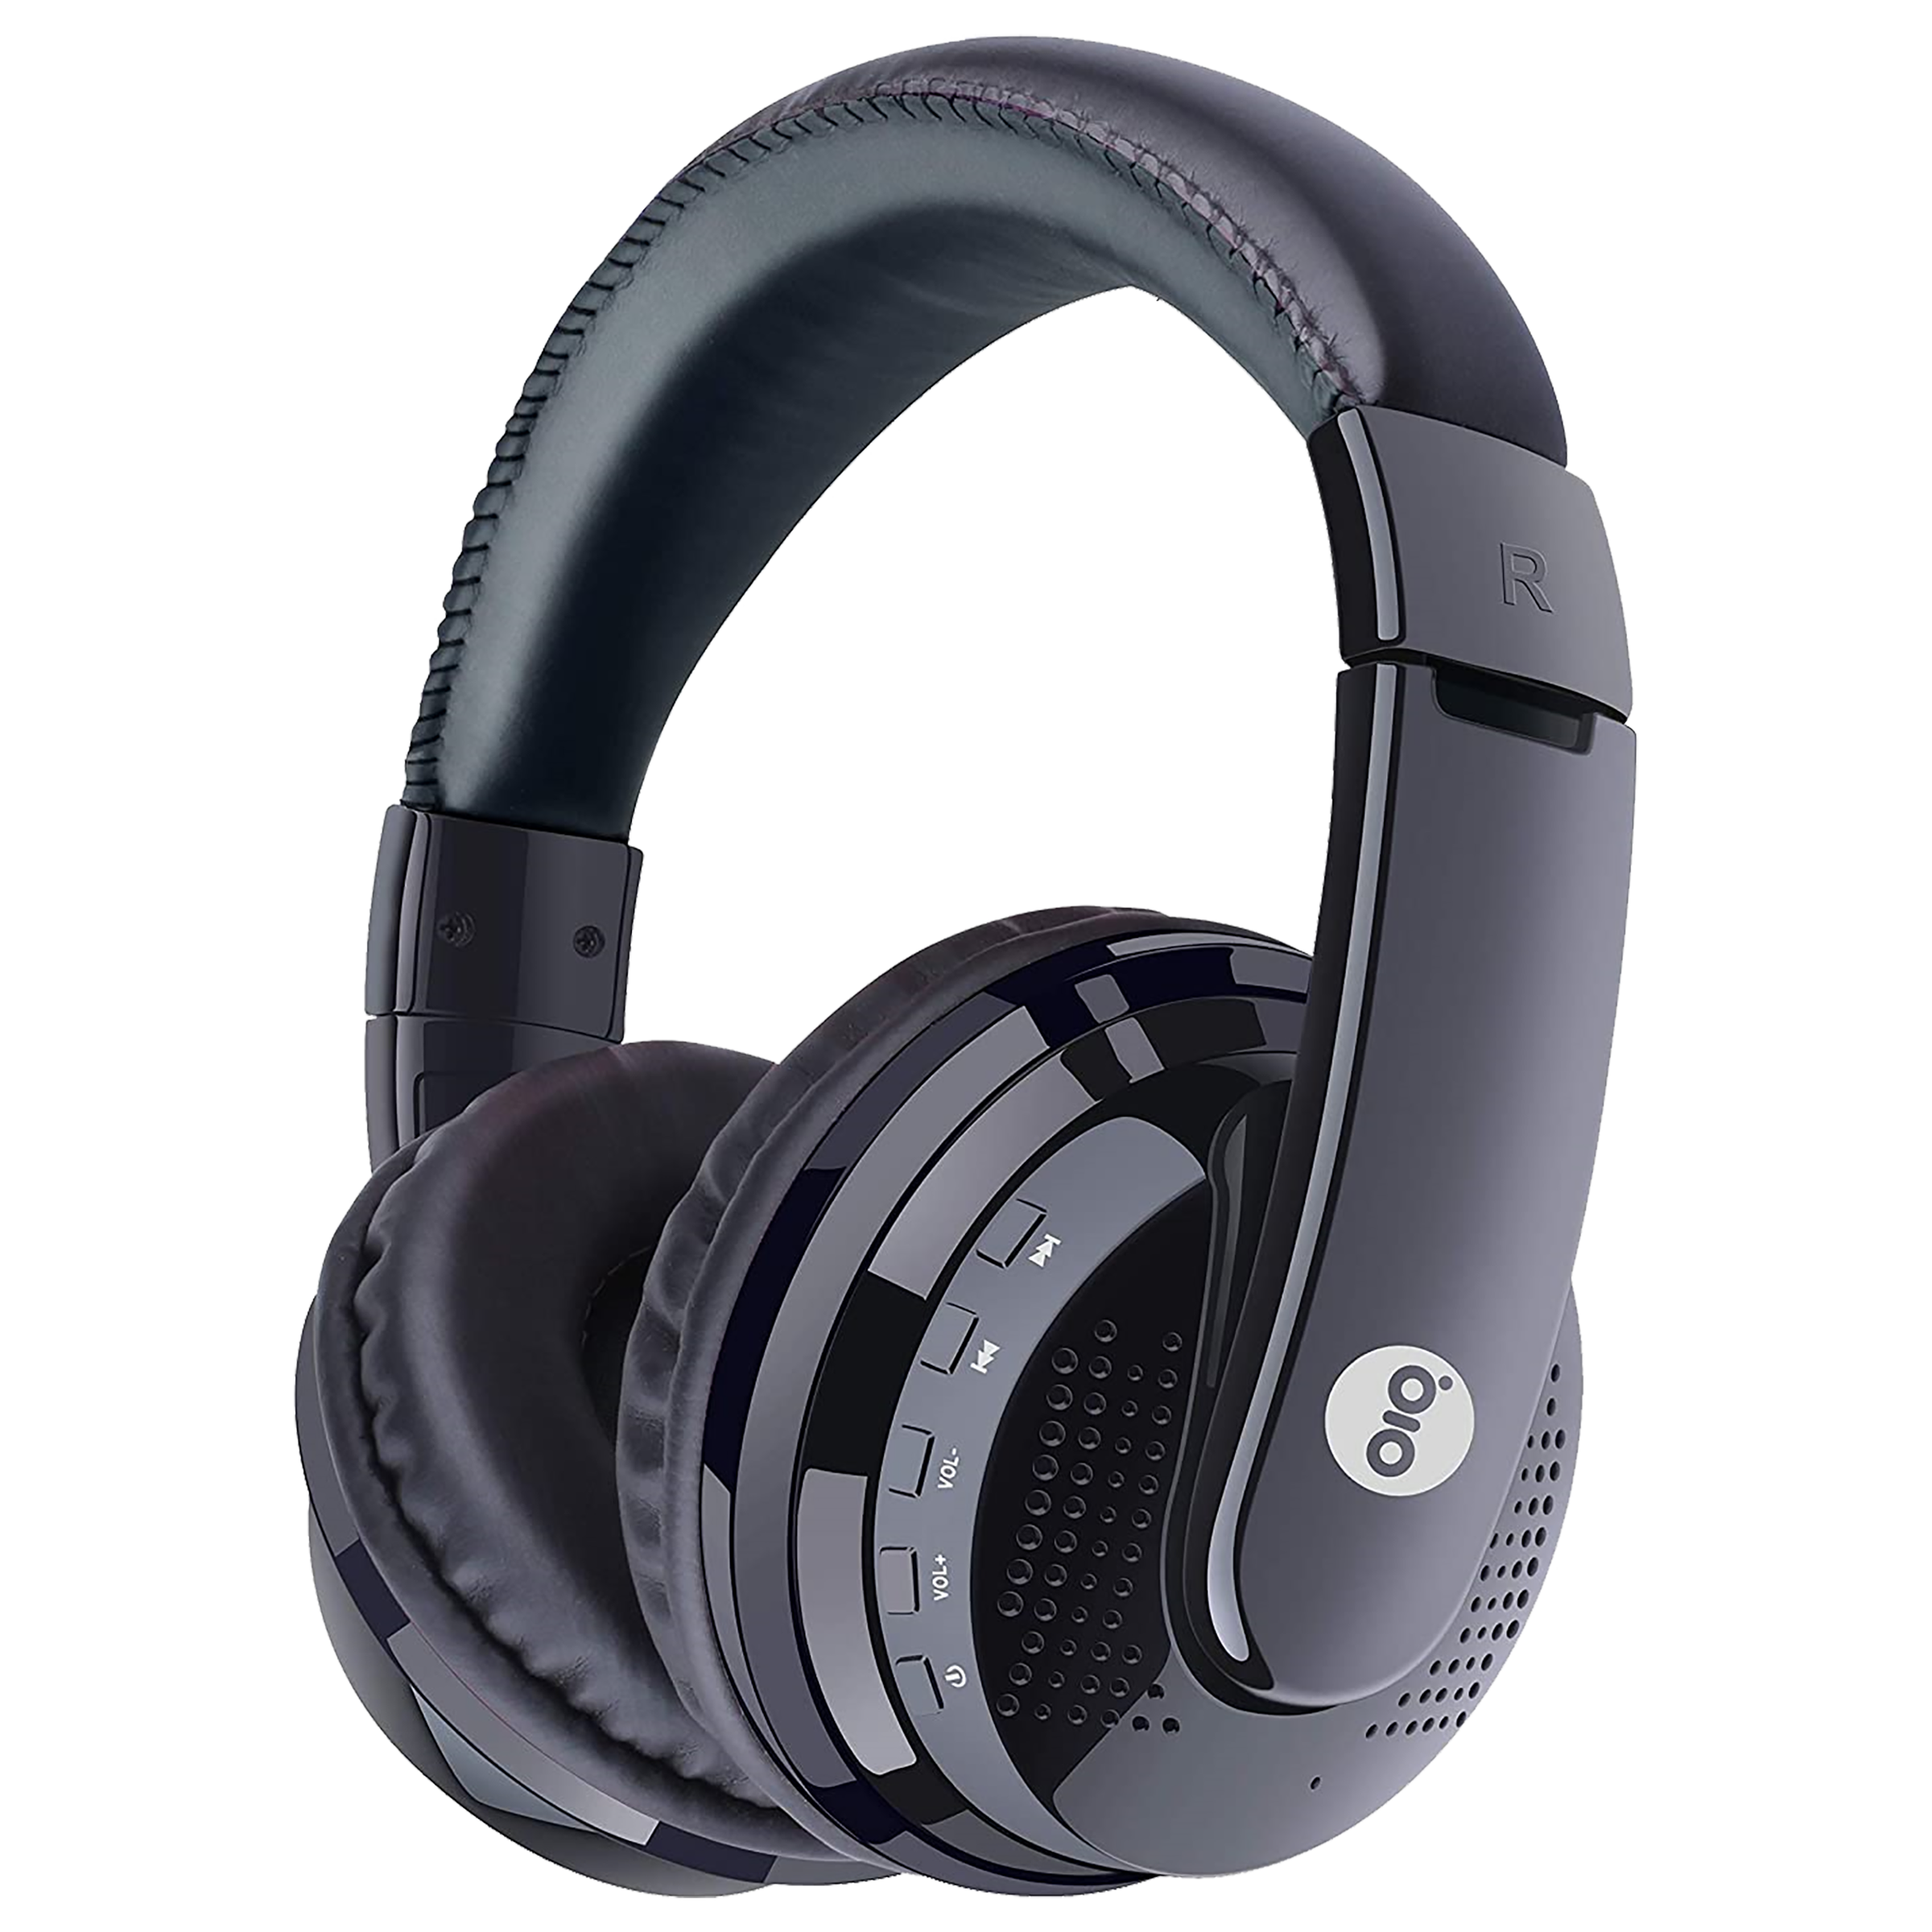 Gizmore Giz Over-Ear MH411 Passive Noise Cancellation Wireless Headphone with Mic (Bluetooth 5.0, Built-In Microphone, Black)